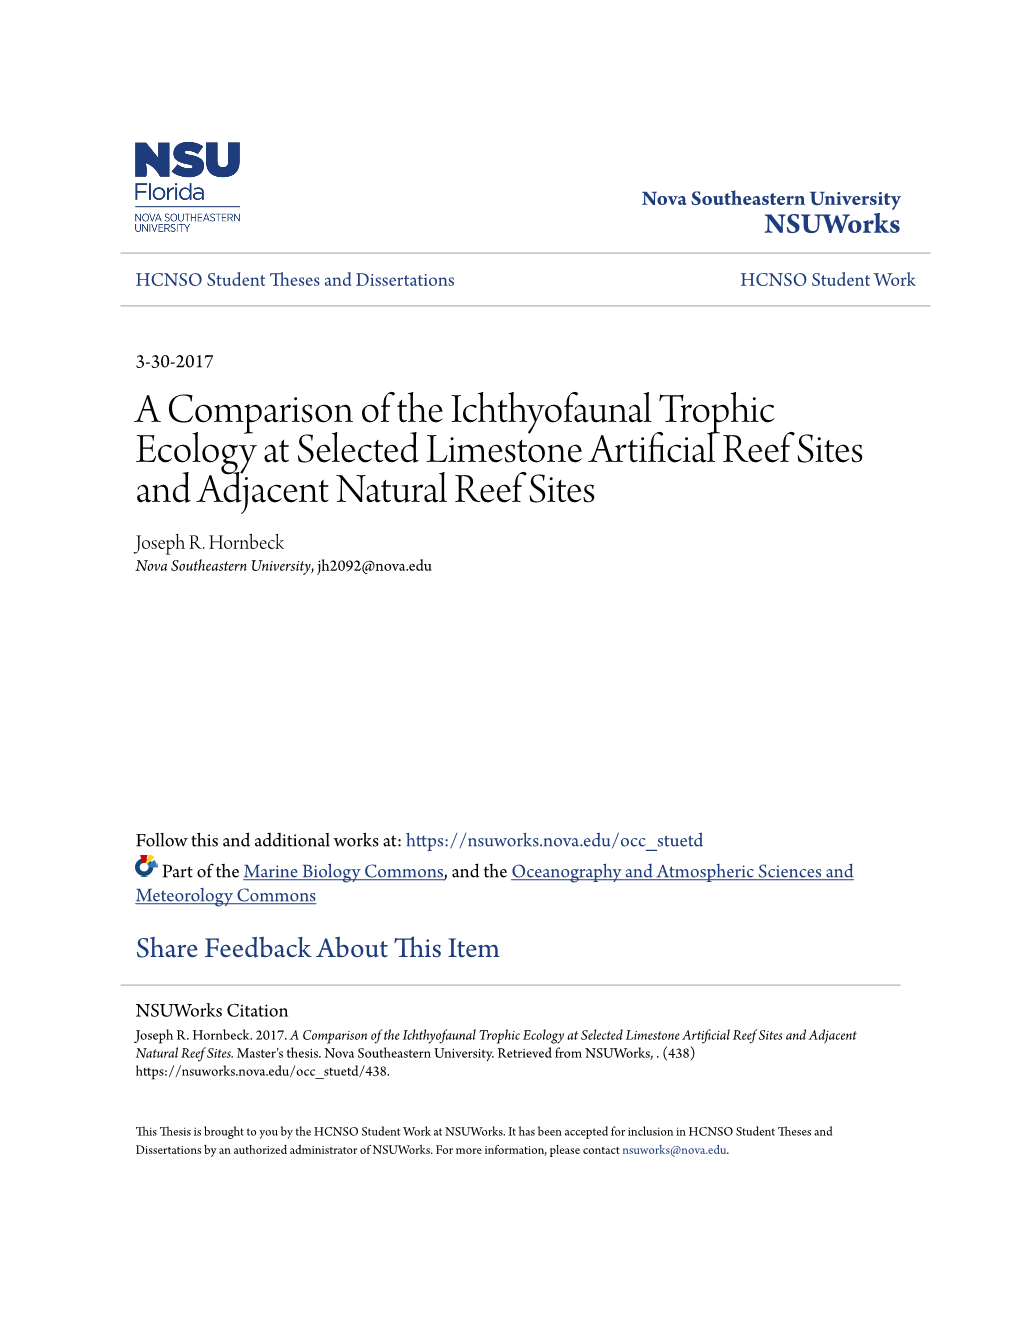 A Comparison of the Ichthyofaunal Trophic Ecology at Selected Limestone Artificial Reef Sites and Adjacent Natural Reef Sites Joseph R